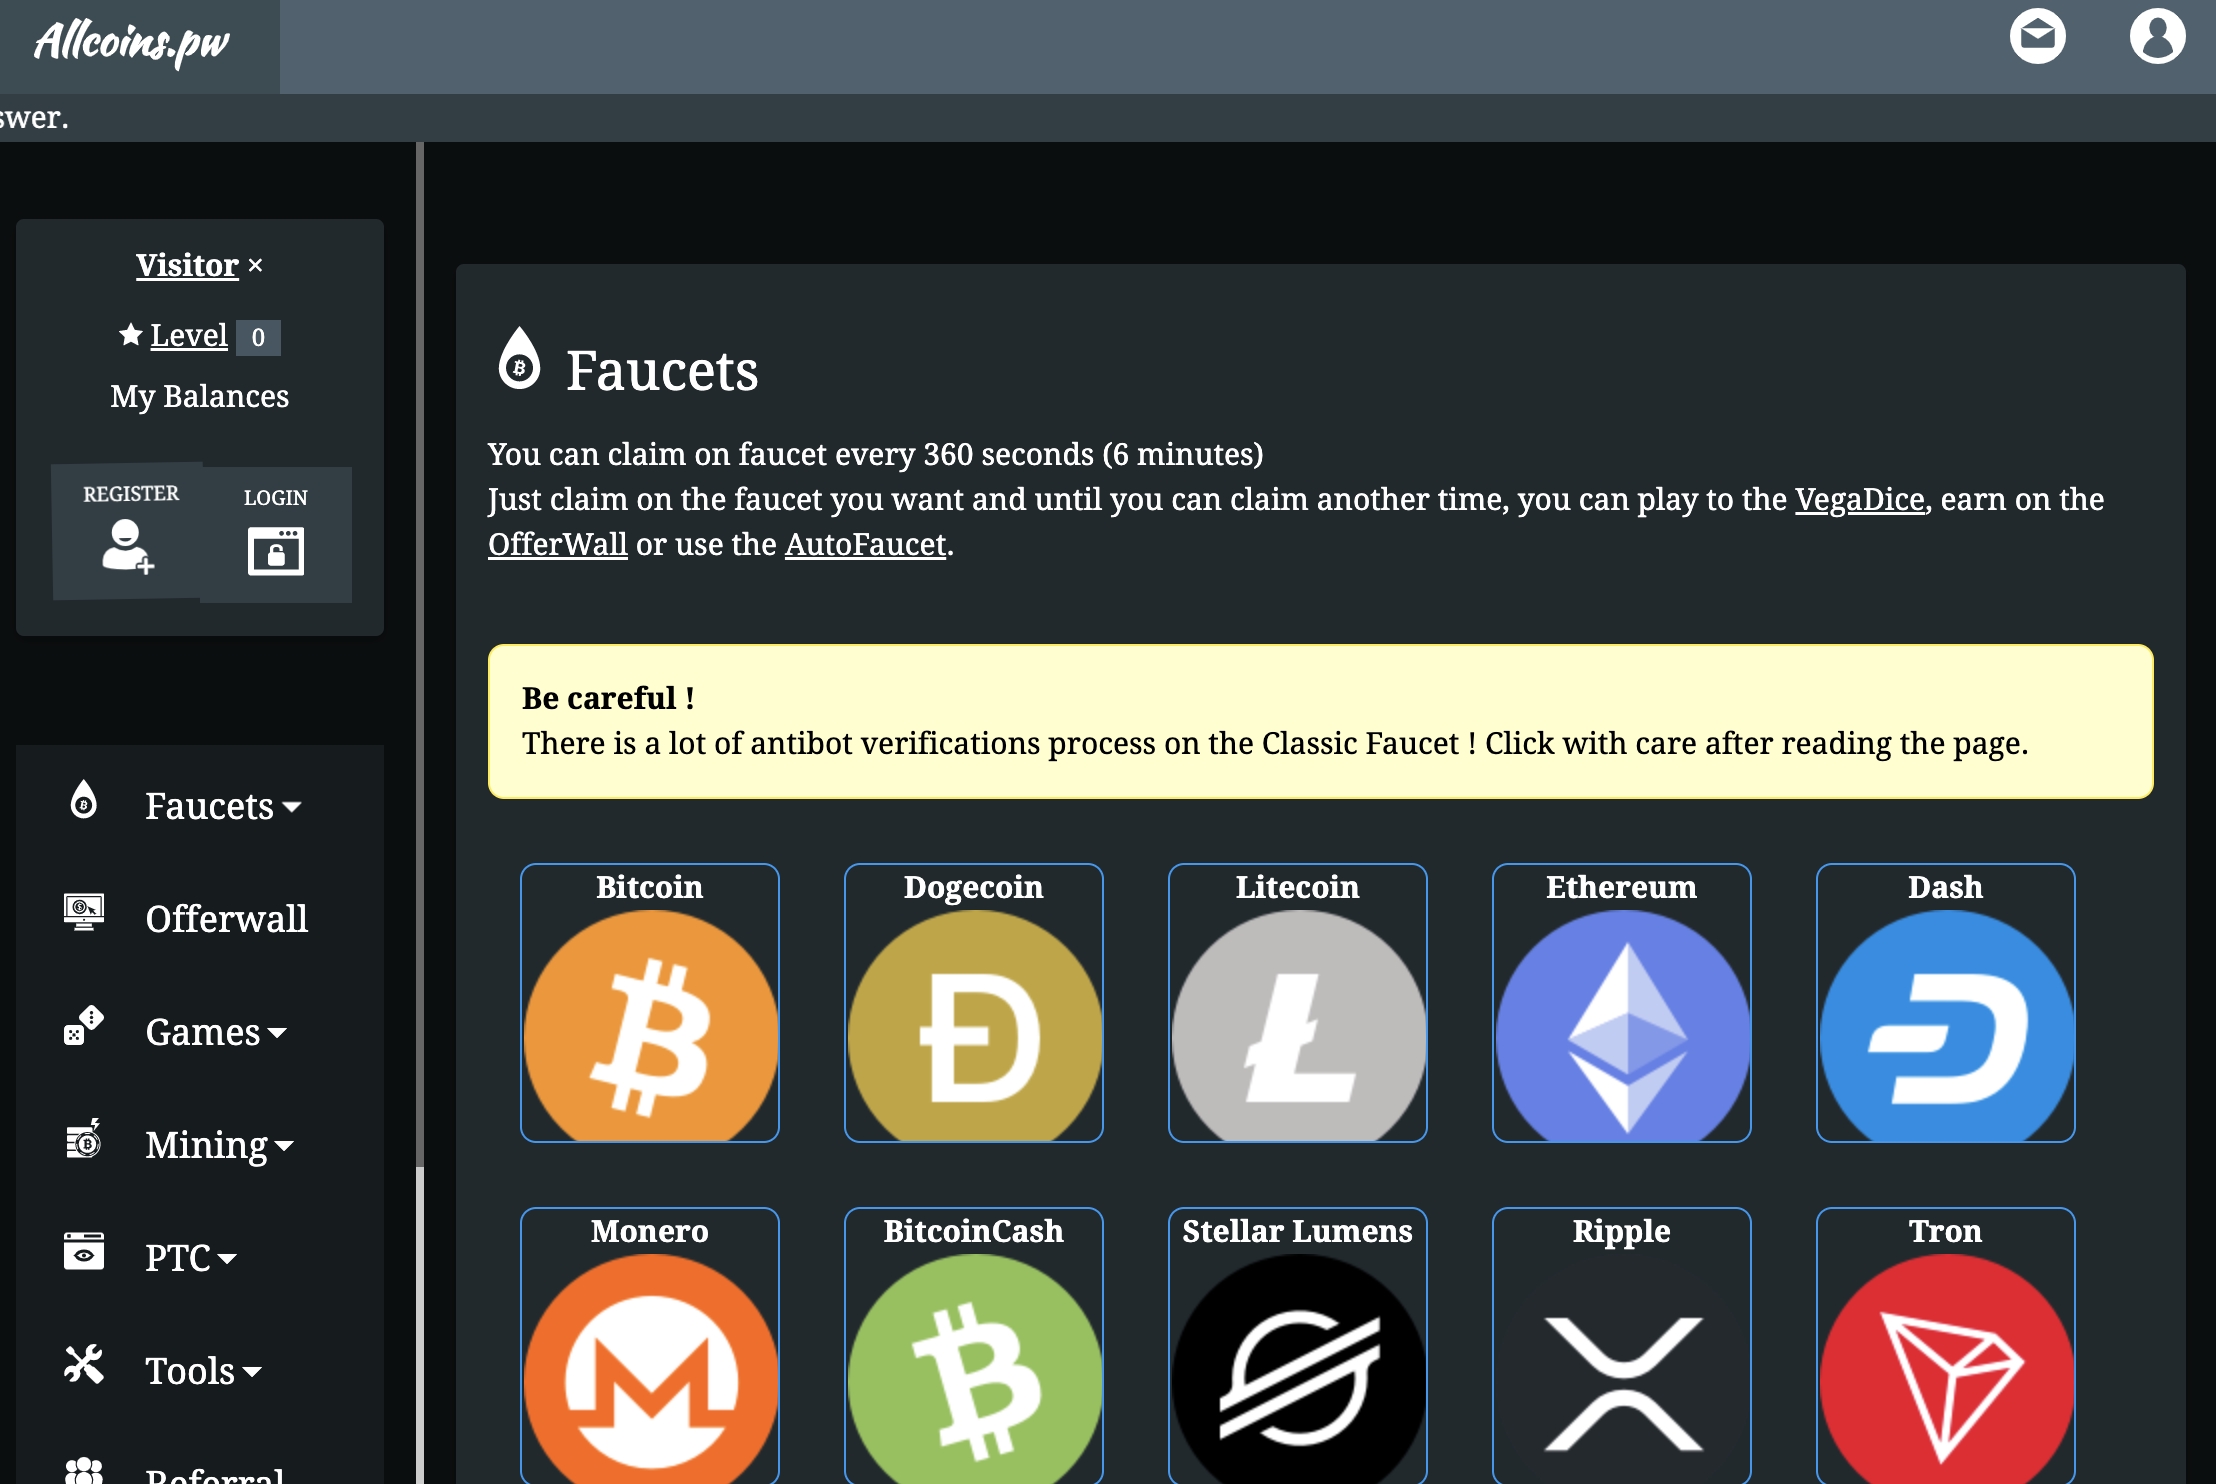 Altcoins.pw faucets